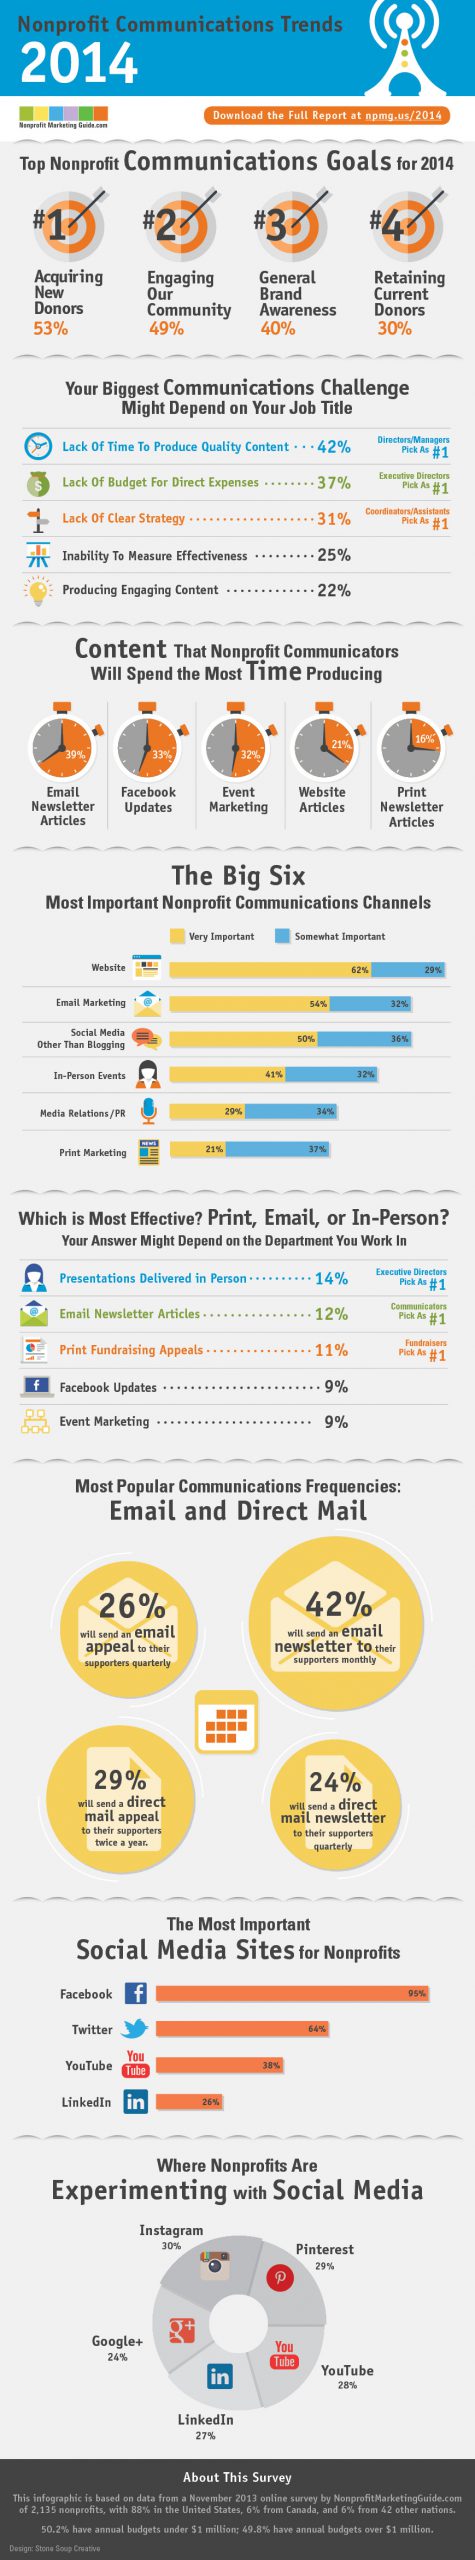 2014 Nonprofit Communications Trends Report [Infographic]